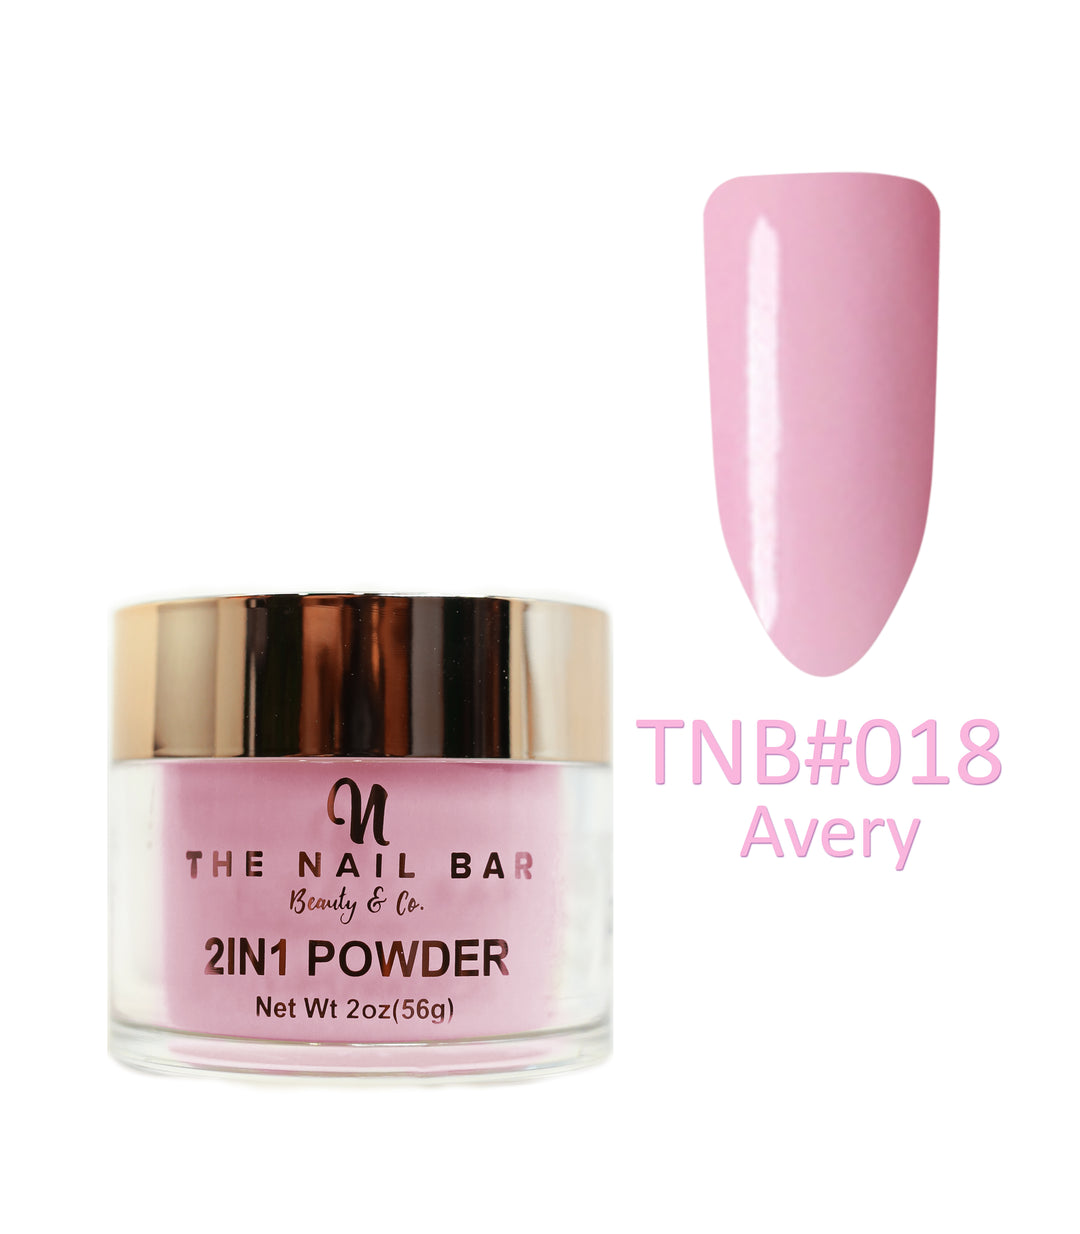 2-In-1 Dipping/Acrylic colour powder (2oz) -Avery - The Nail Bar Beauty & Co.